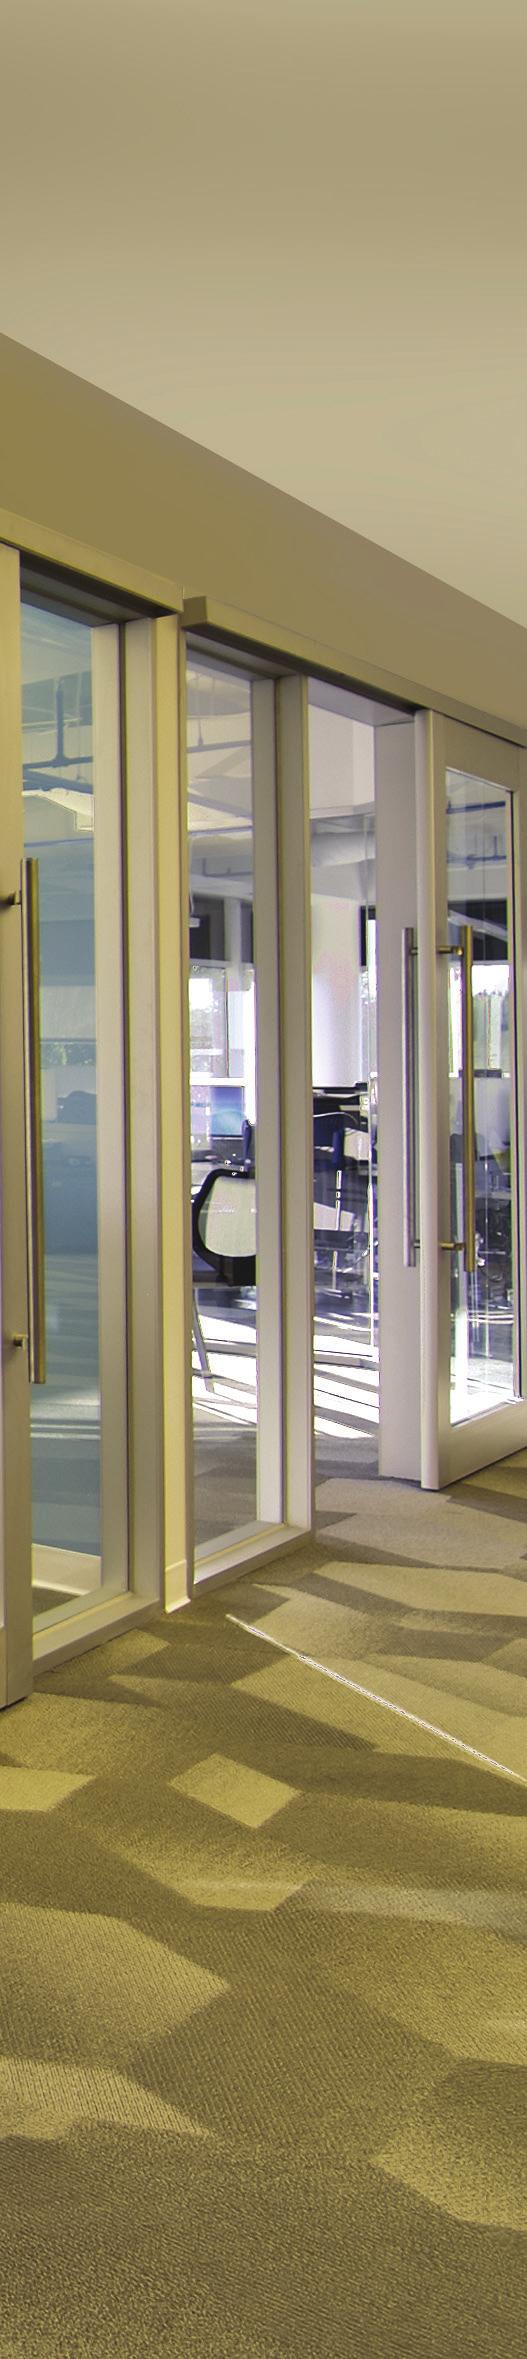 The DOOR Aluminum stile and rail - Sleek design matches the frame finish - Various stile and rail sizes available - Full glass cutout provides daylighting and creates an open environment with privacy